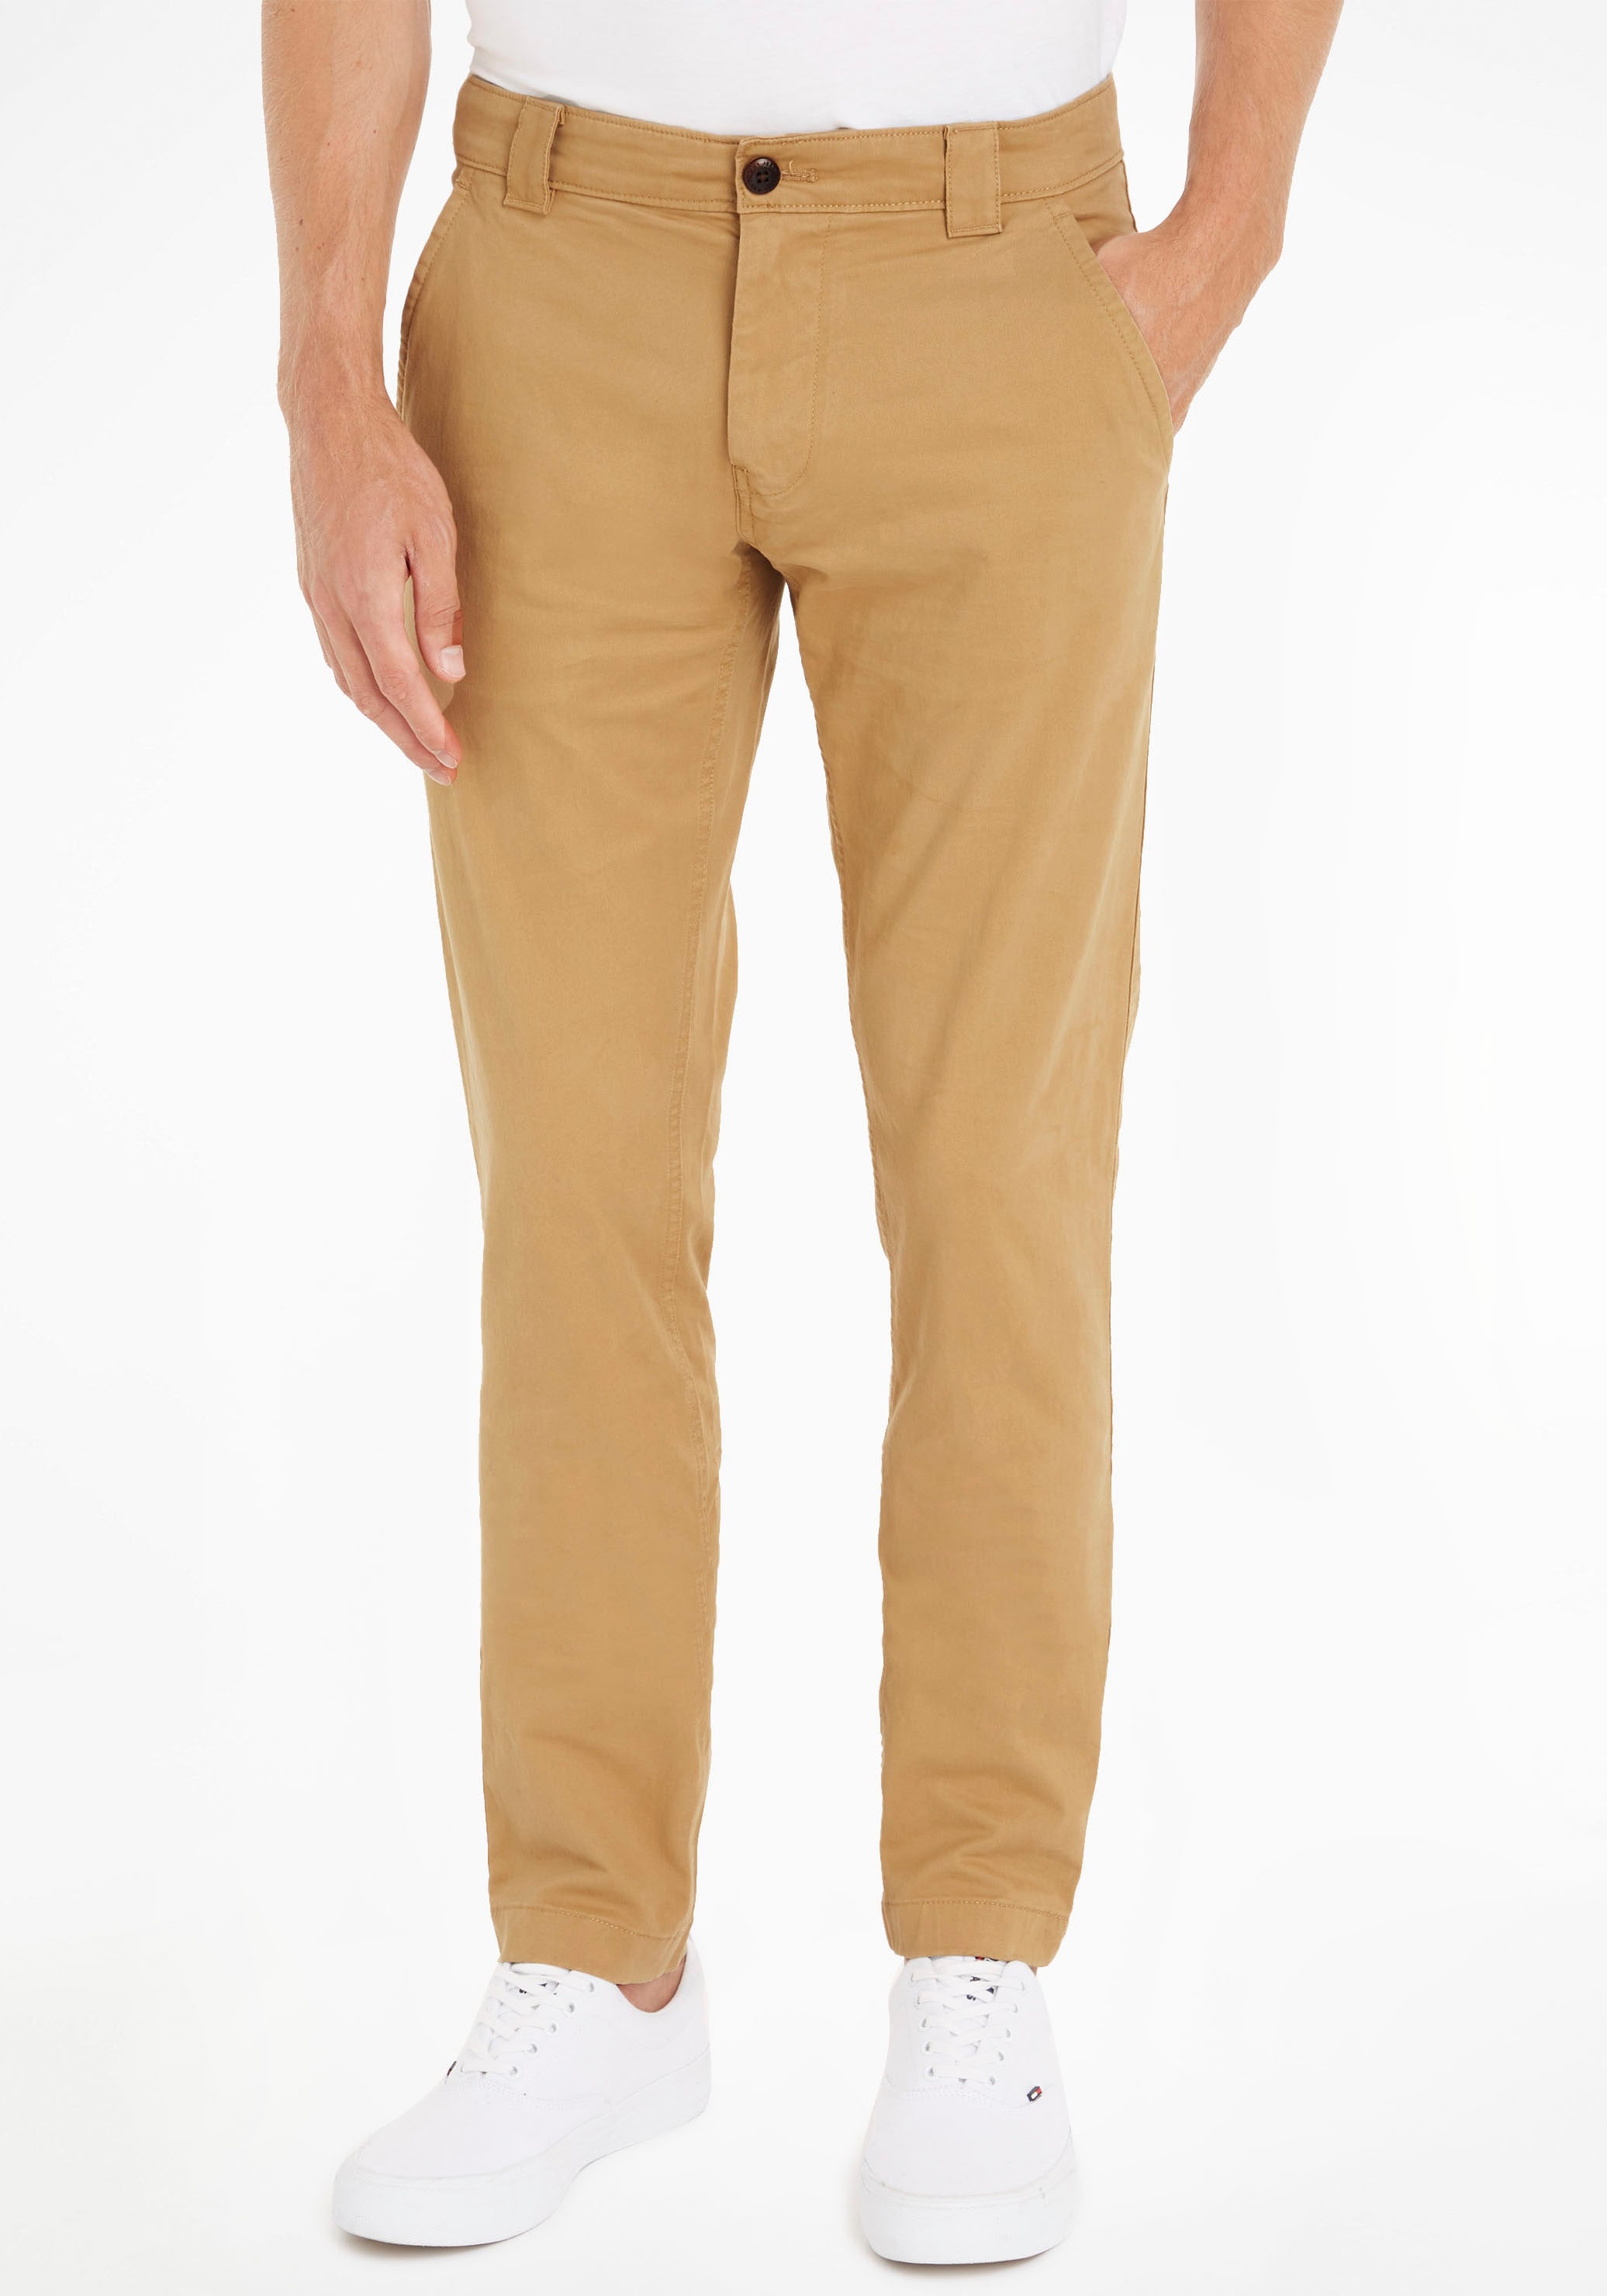 Markenlabel PANT«, ♕ »TJM Jeans bei Chinohose SCANTON CHINO mit Tommy